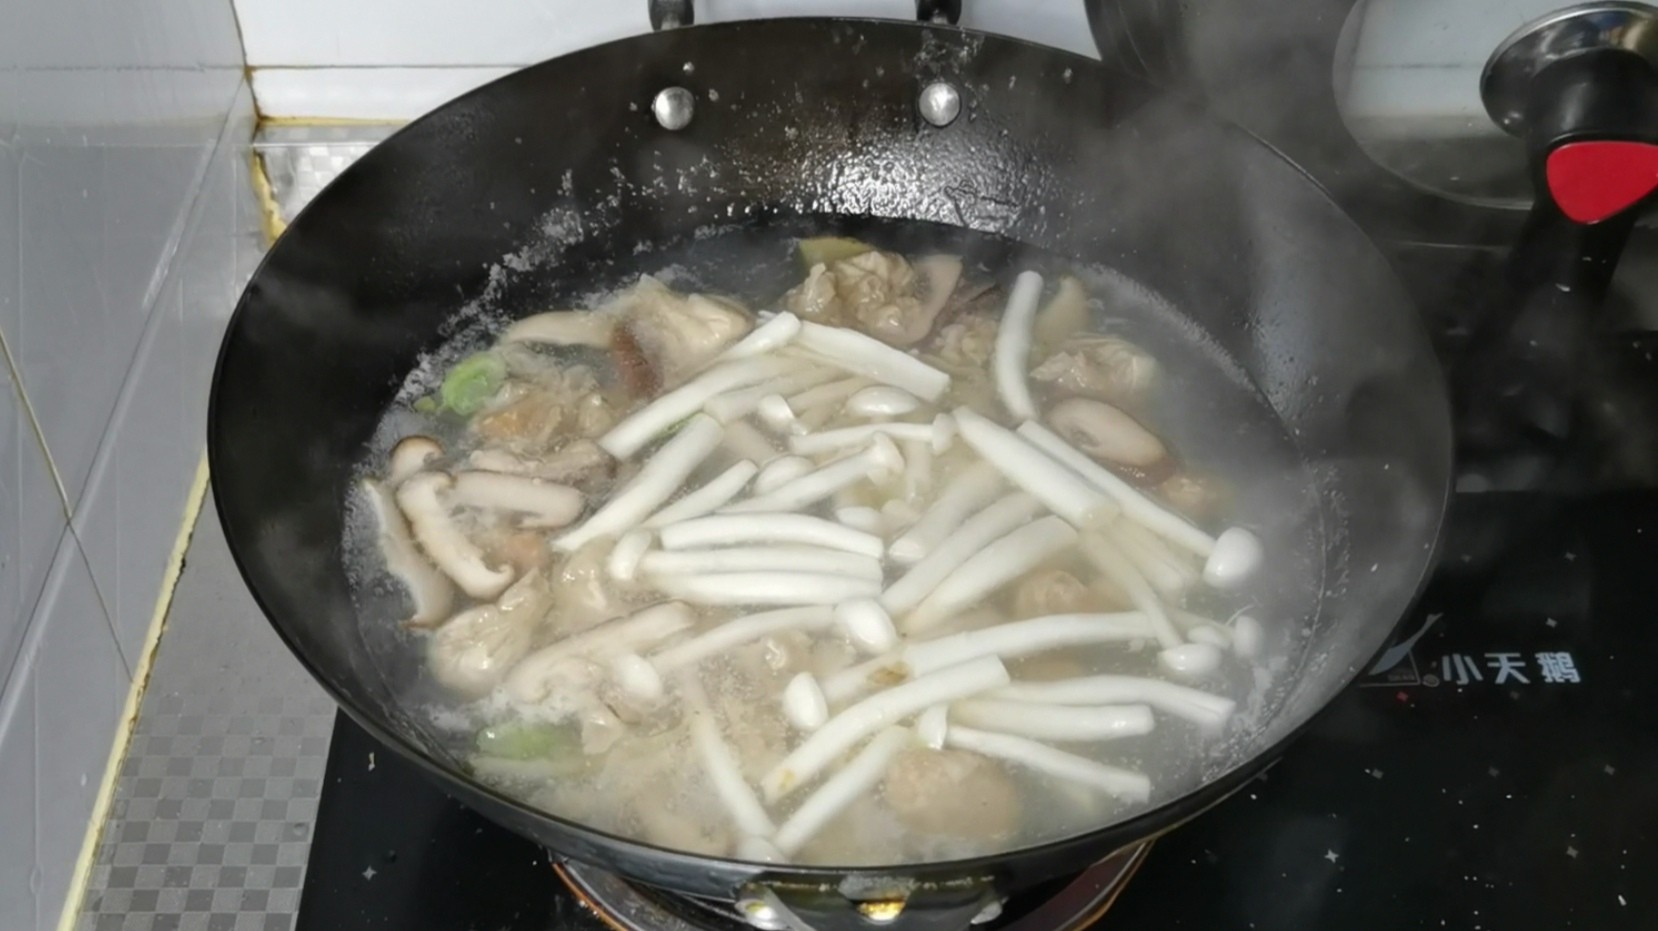 Meat and Mushroom Soup recipe